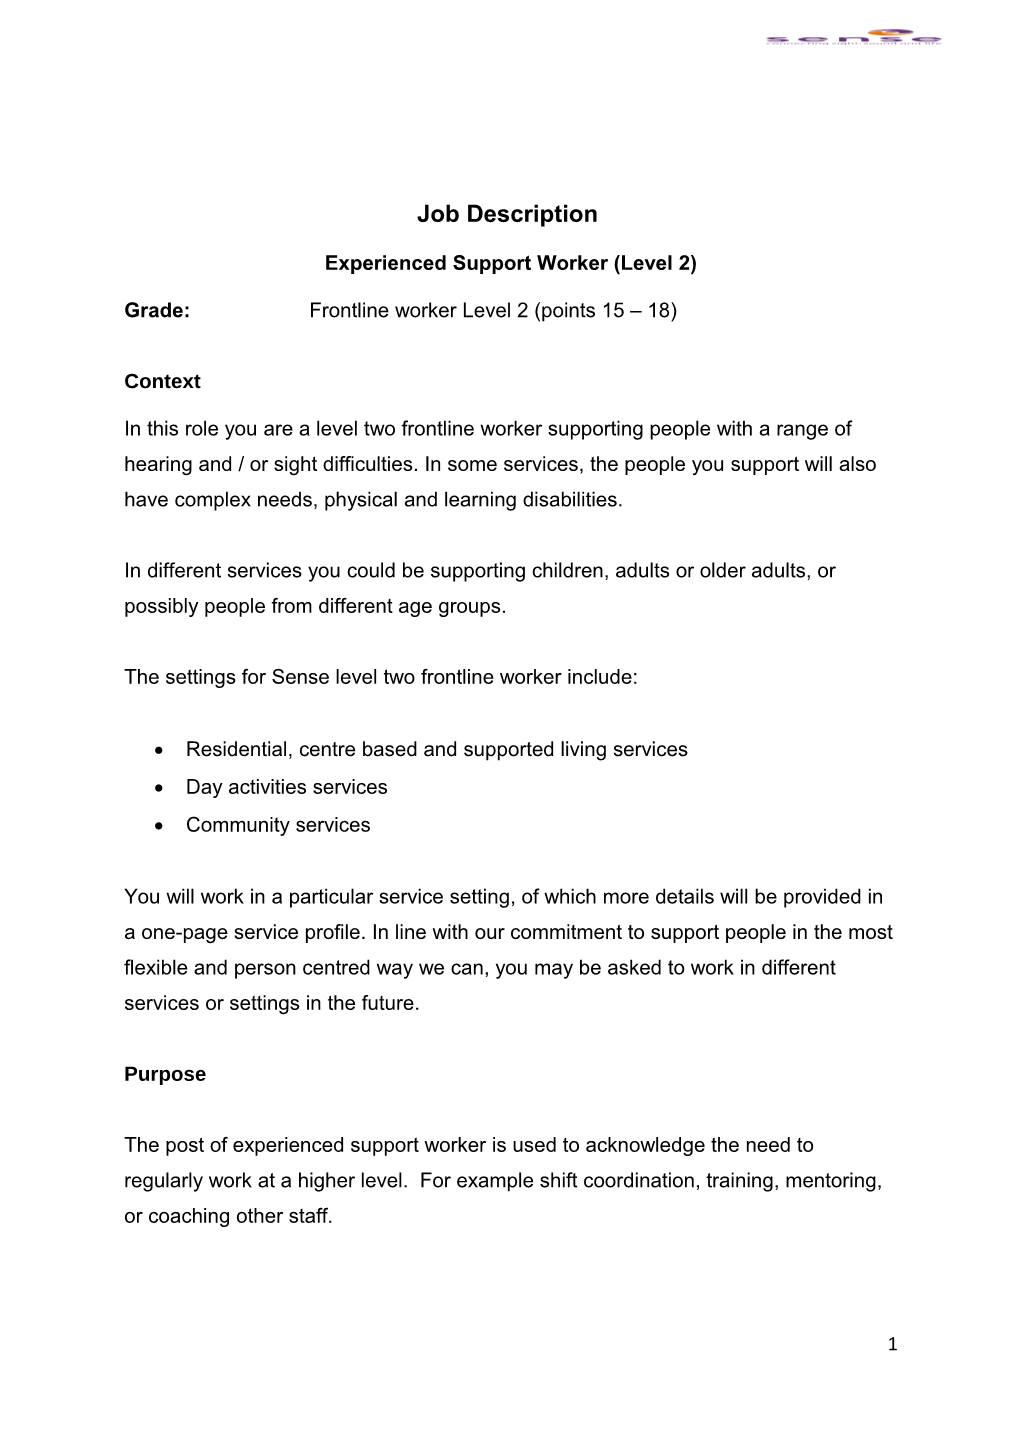 Experienced Support Worker (Level 2)